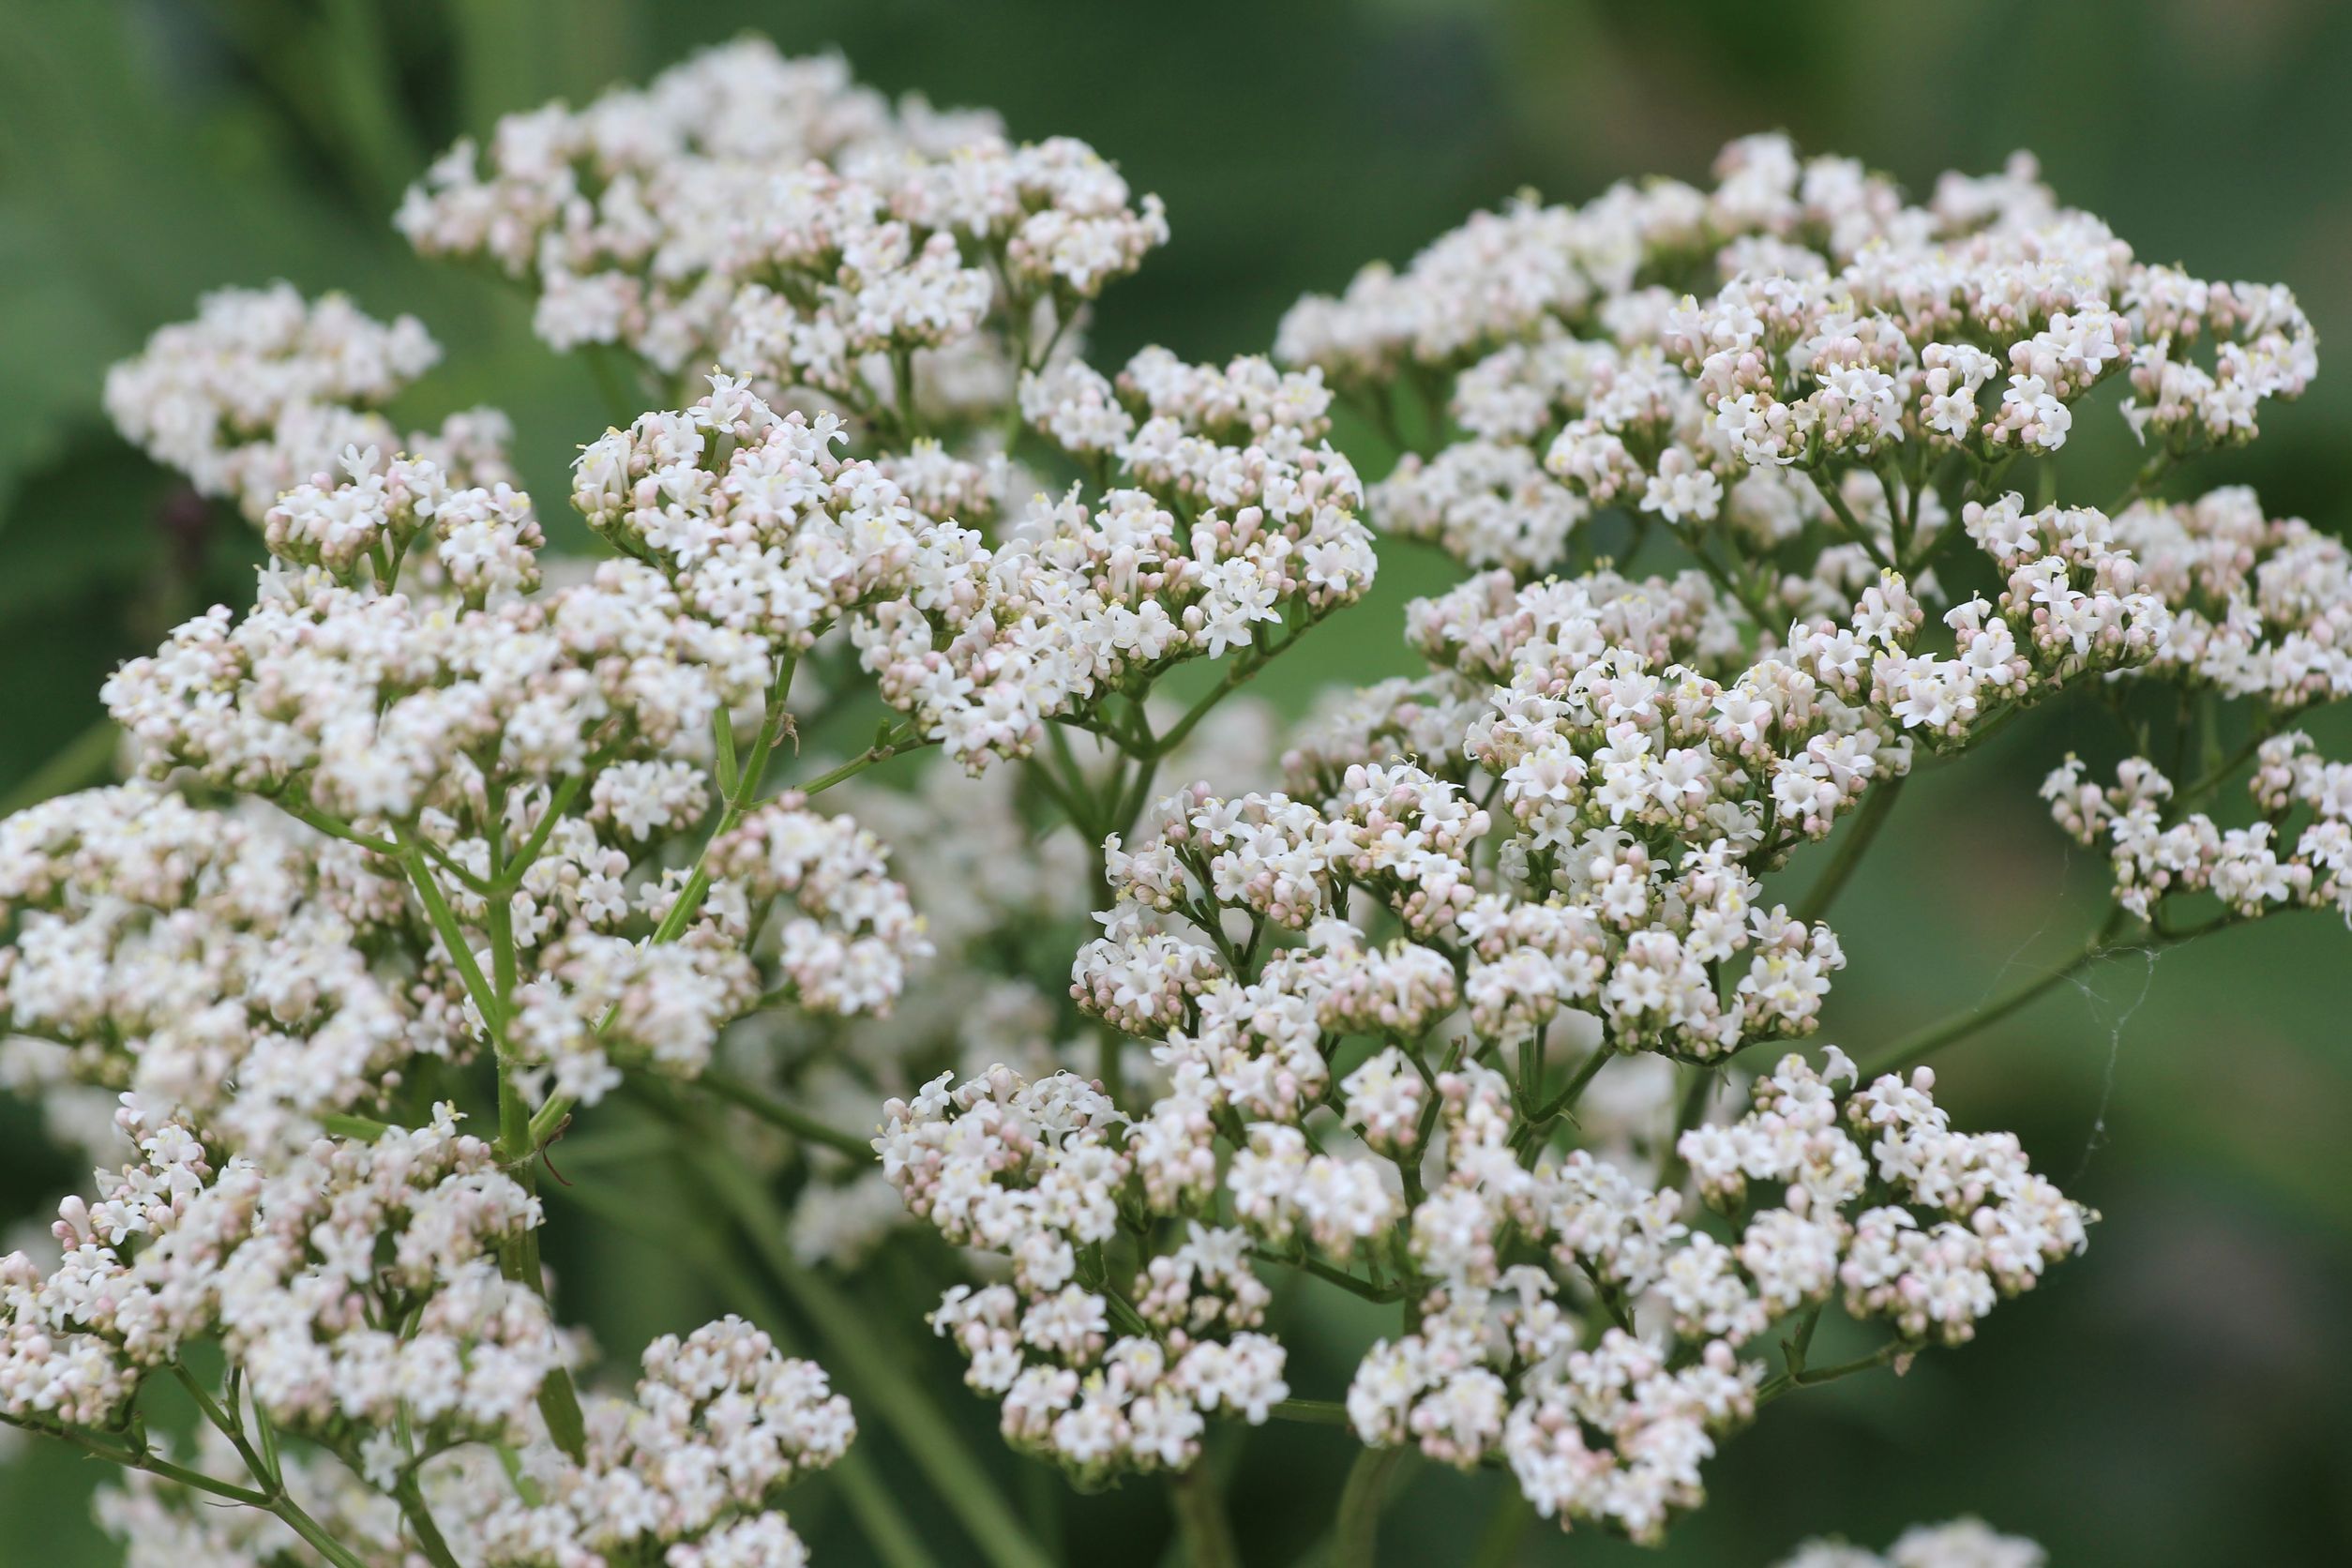 valerian essential oil uses and benefits